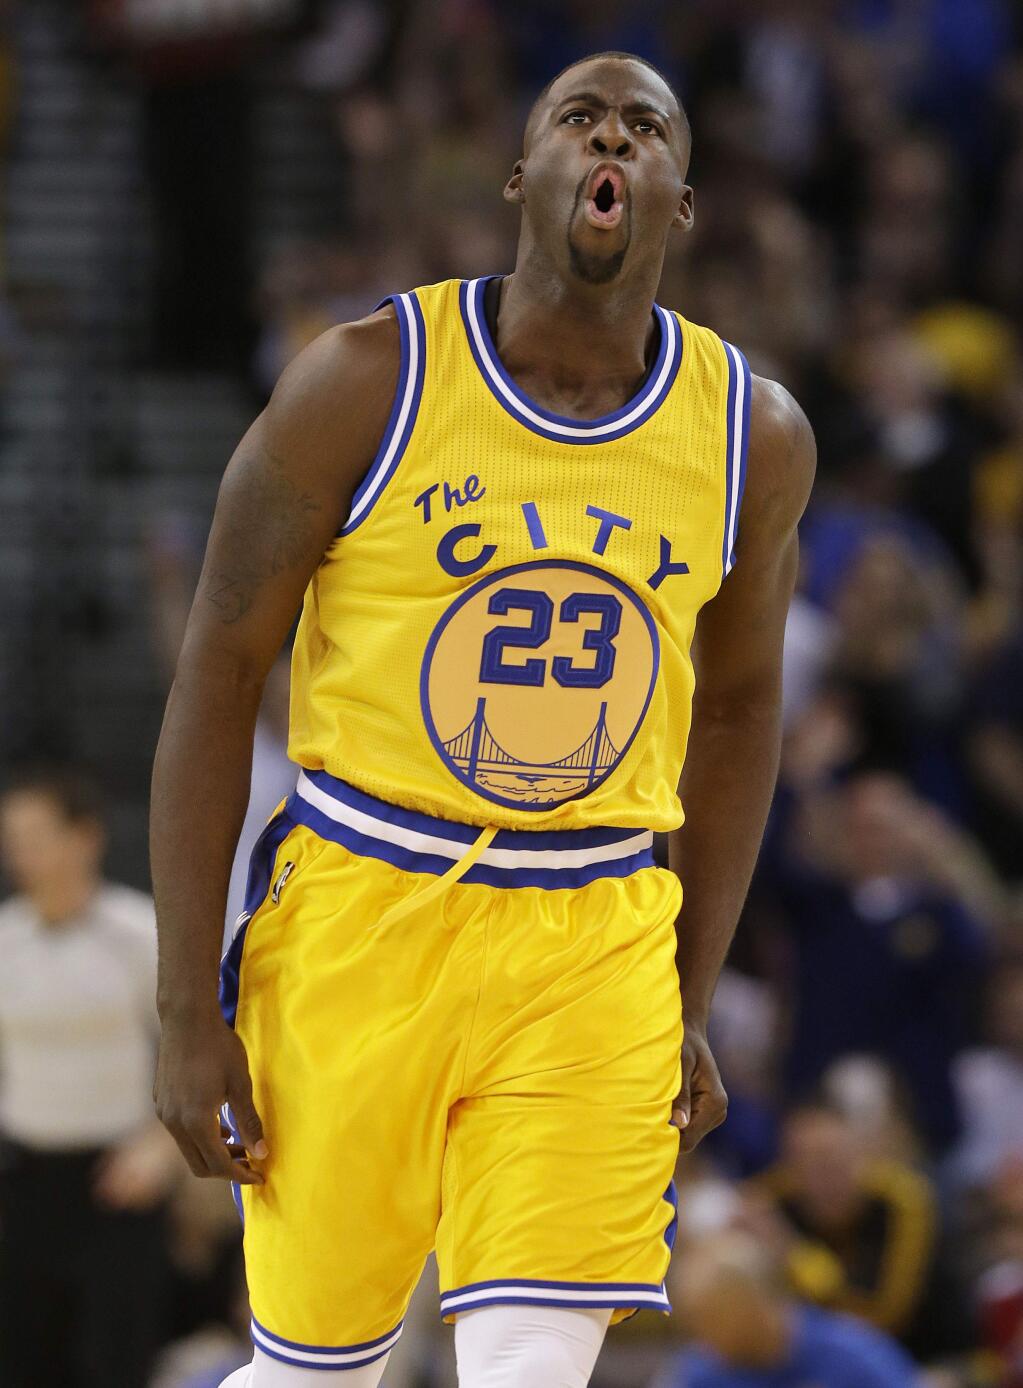 Golden State Warriors forward Draymond Green reacts after making a 3-point basket during the first half of an NBA basketball game against the Los Angeles Lakers in Oakland, Calif., Tuesday, Nov. 24, 2015. (AP Photo/Jeff Chiu)